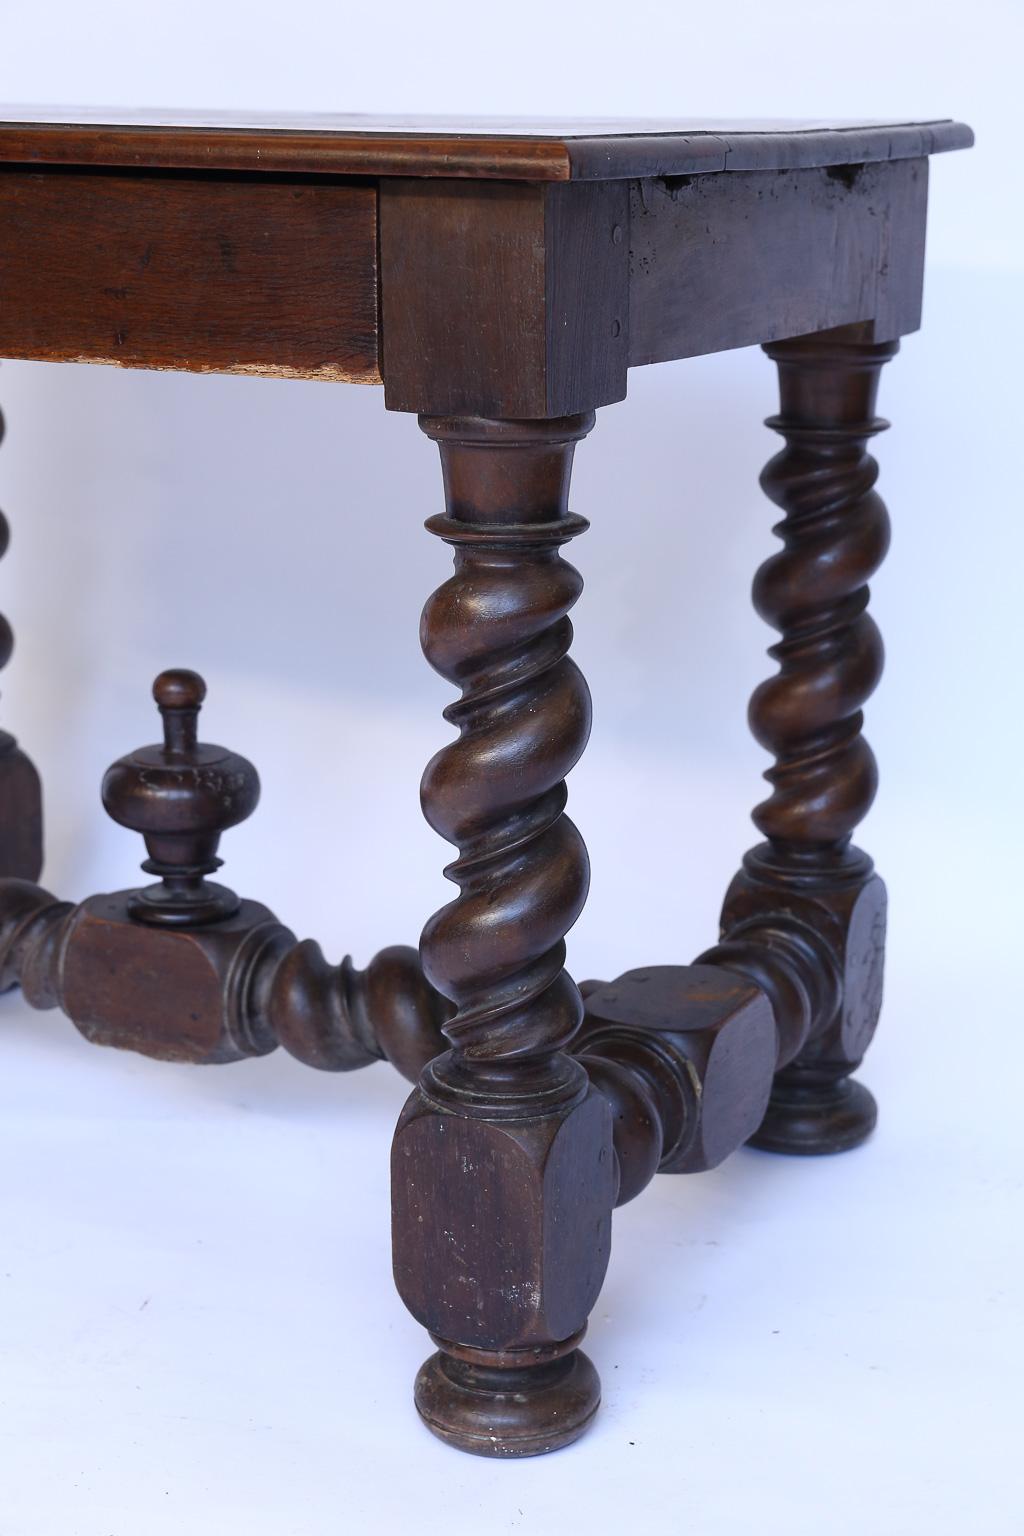 This is an antique French turned leg table with one drawer. Standing on four turned legs with an ornamental trestle, the table is strong and sturdy. The drawer has a single iron pull. Perfect for a side or end table with the drawer for storage.